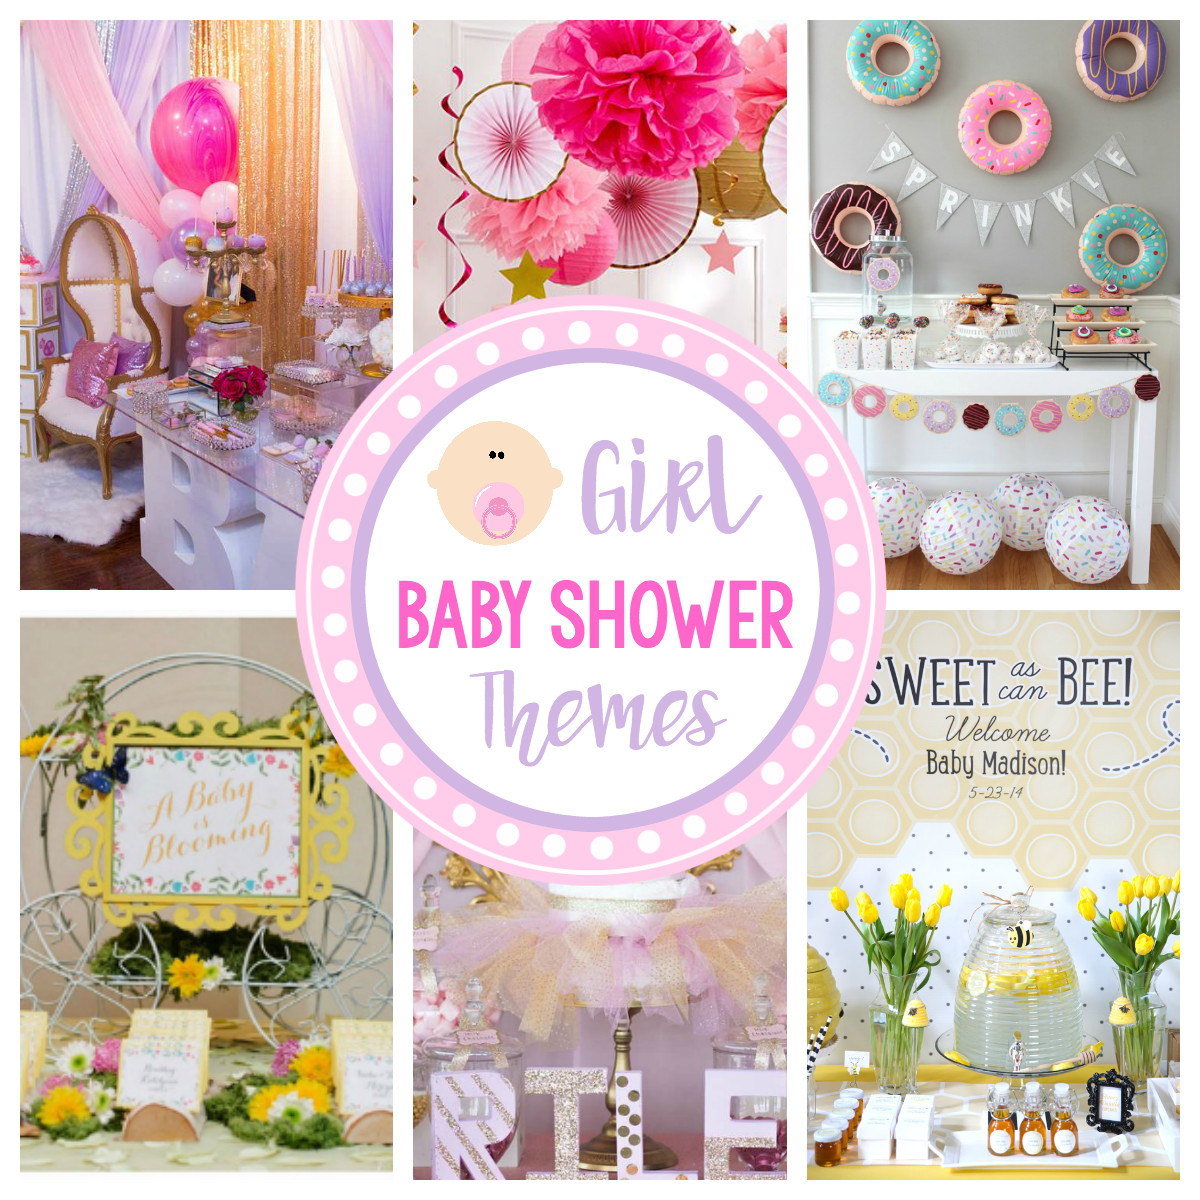 Baby Shower Decorations Ideas For A Girl
 Cute Girl Baby Shower Themes & Ideas – Fun Squared